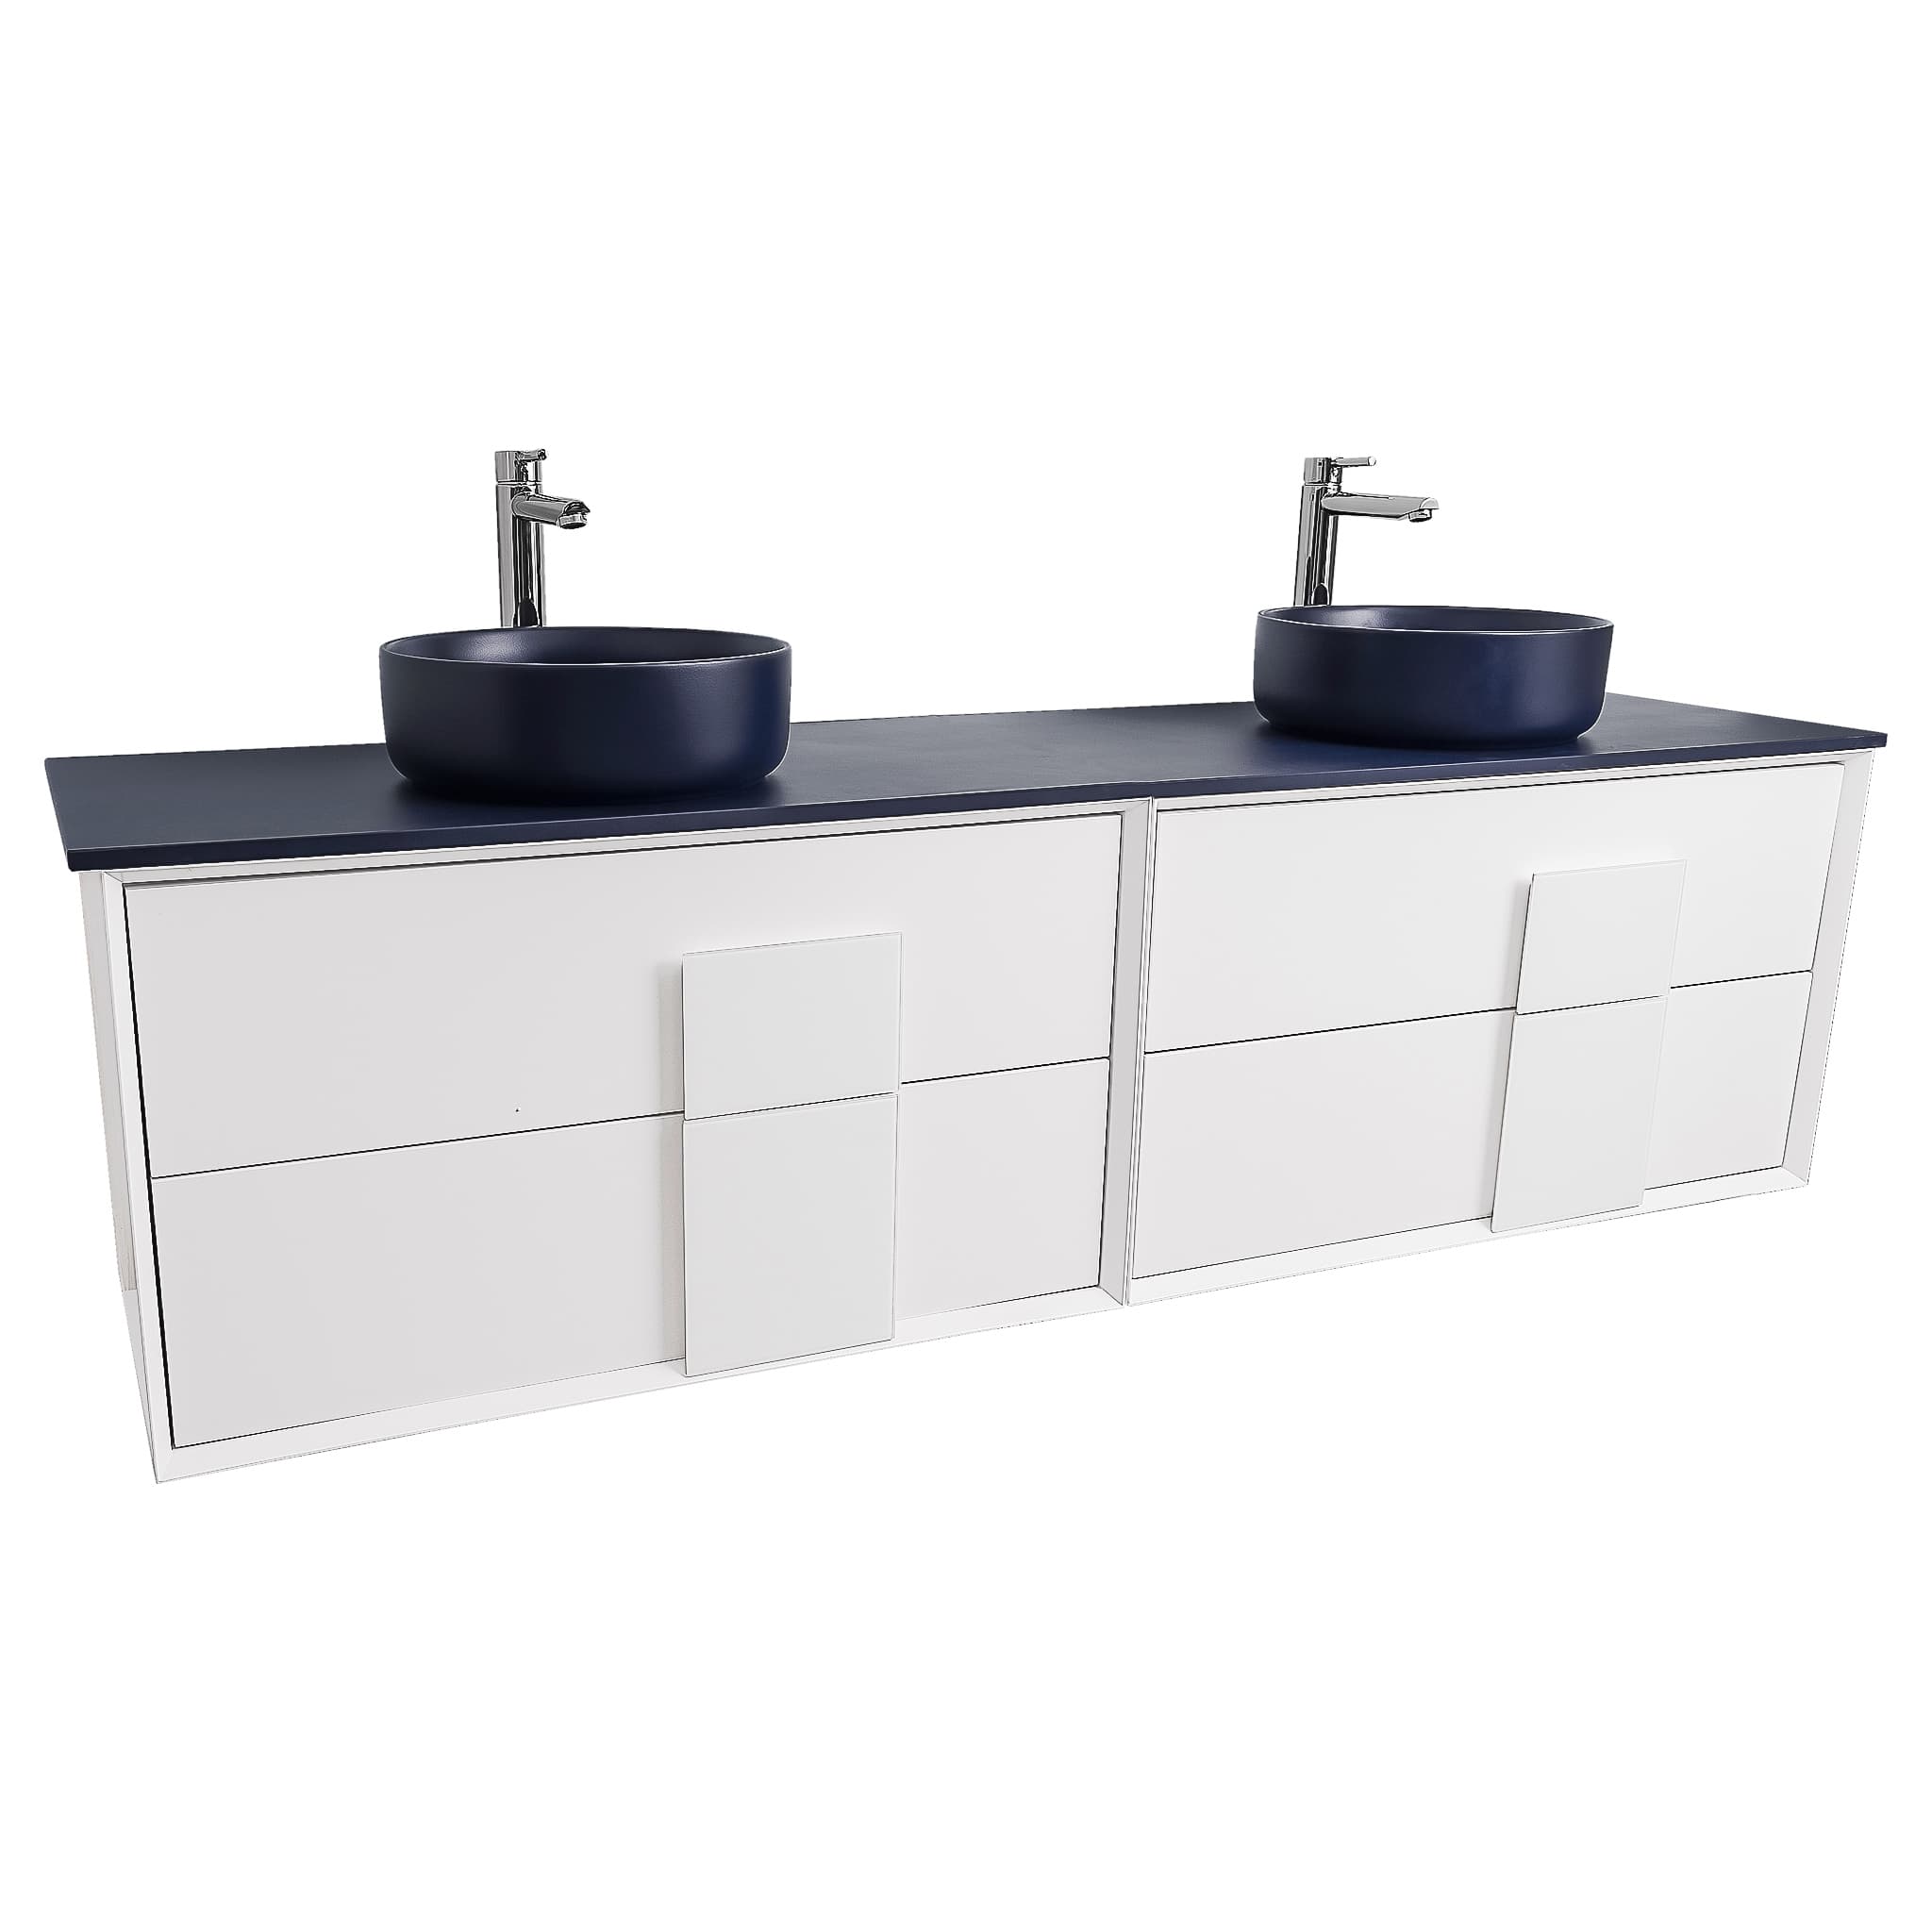 Piazza 63 Matte White With White Handle Cabinet, Ares Navy Blue Top and Two Ares Navy Blue Ceramic Basin, Wall Mounted Modern Vanity Set